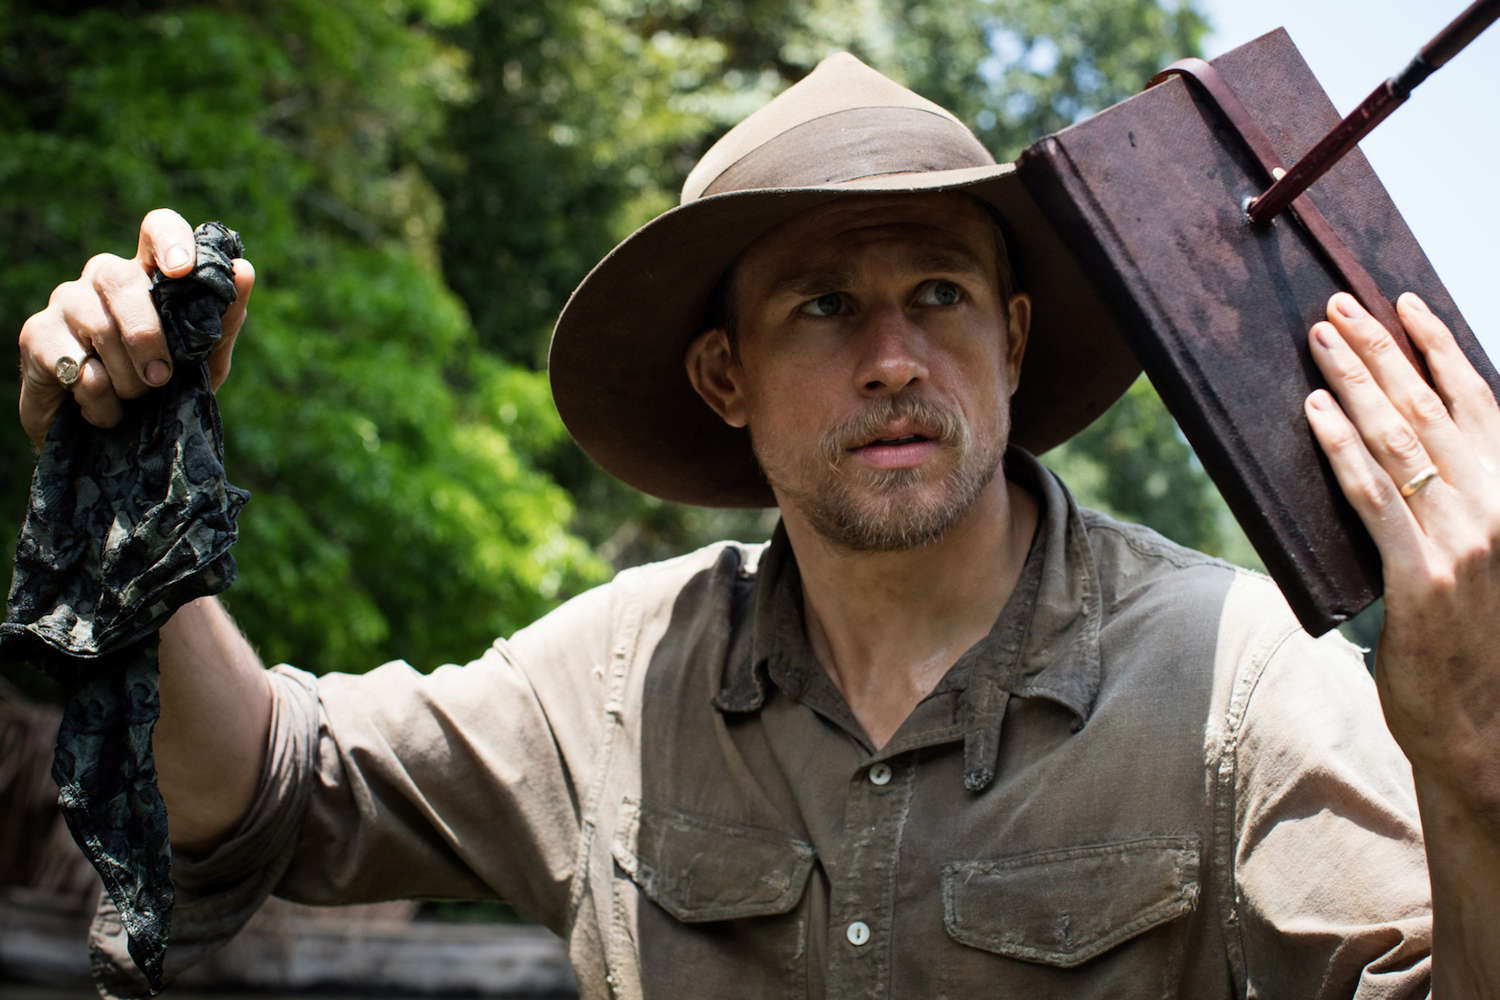 The Lost City of Z (2016)